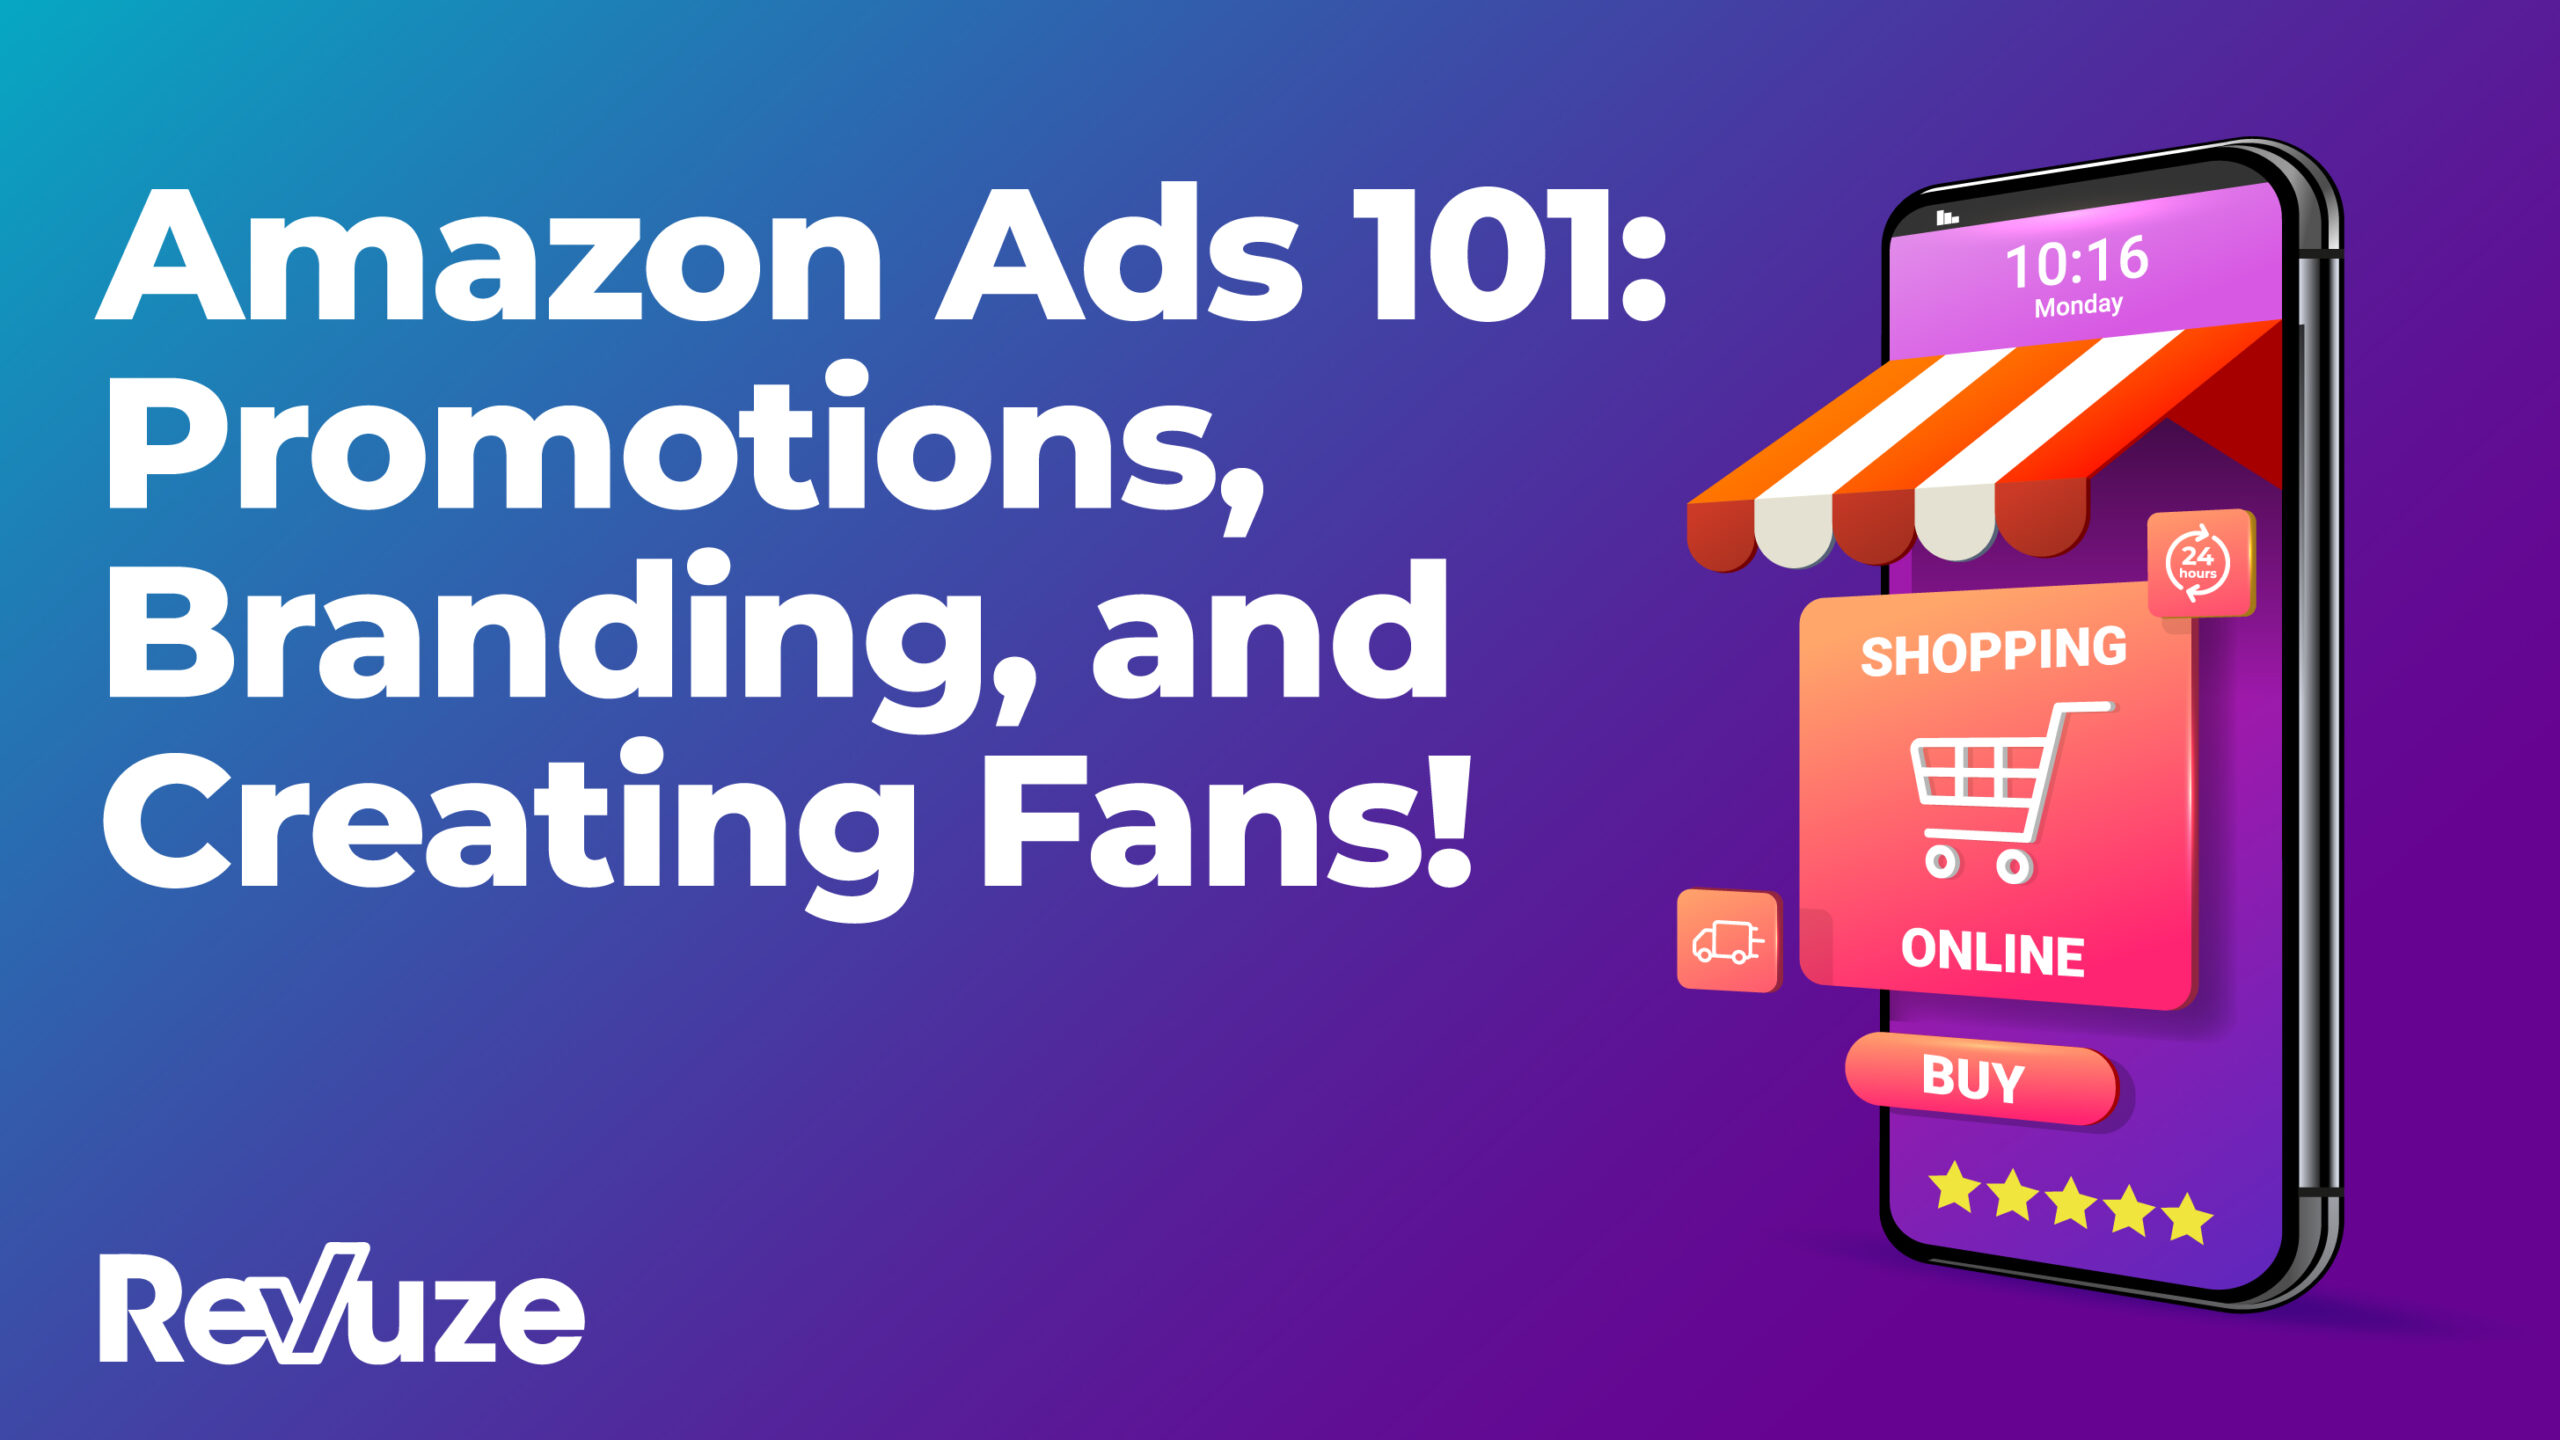 Amazon Ads 101: How to Make a Your Brand Stand Out